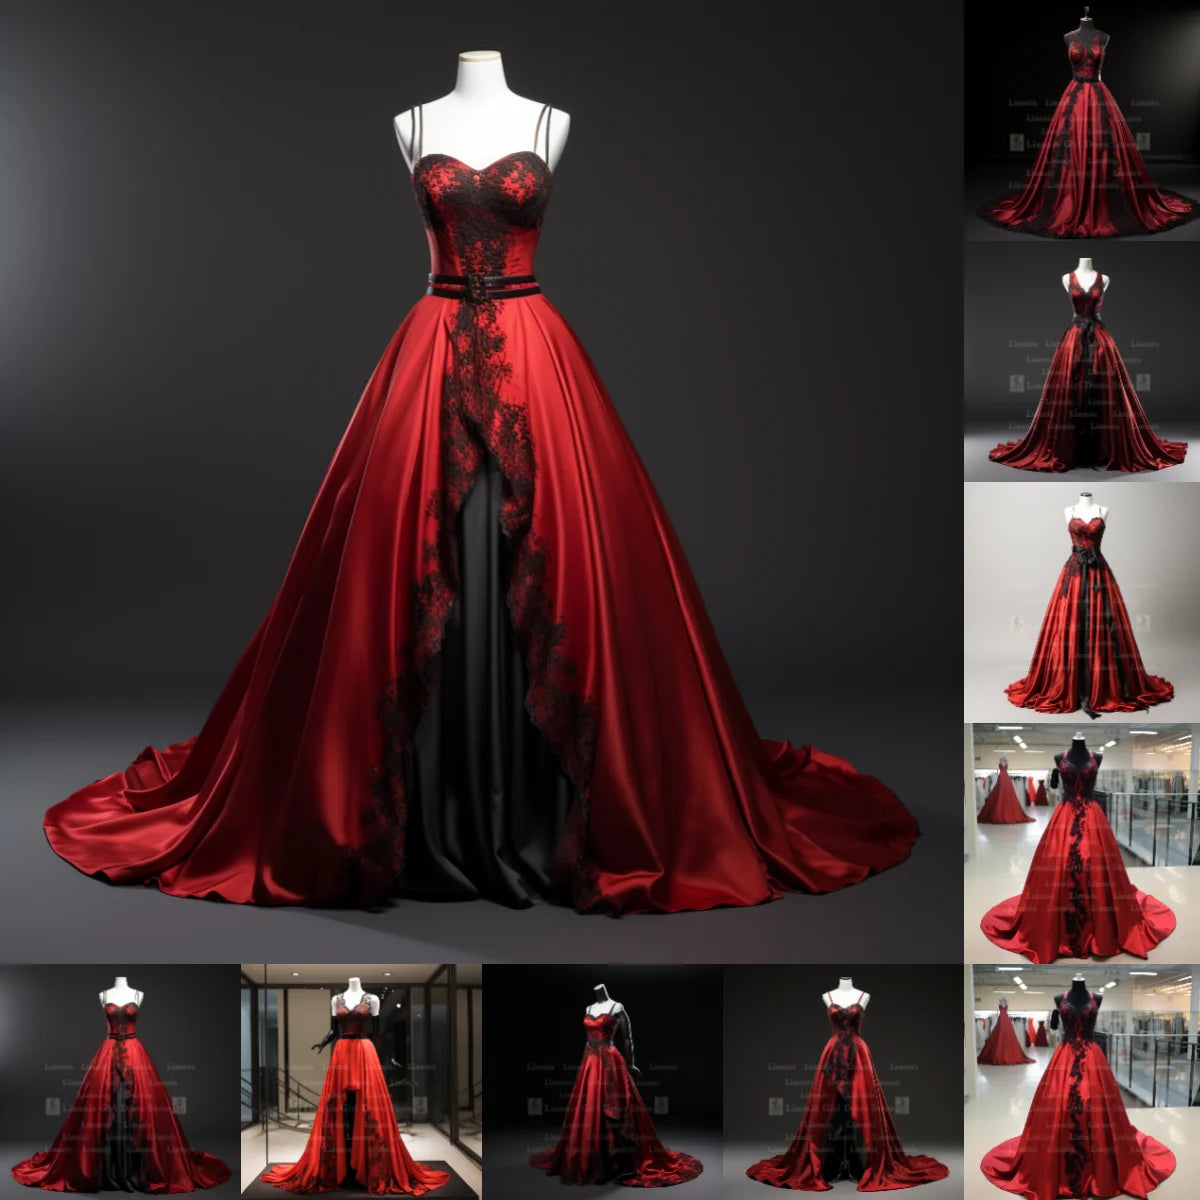 Red Satin With Black Lace Edge Applique Floor Length Lace Up Evening Dress Birthday Party Elegant Clothing Princess SKirt